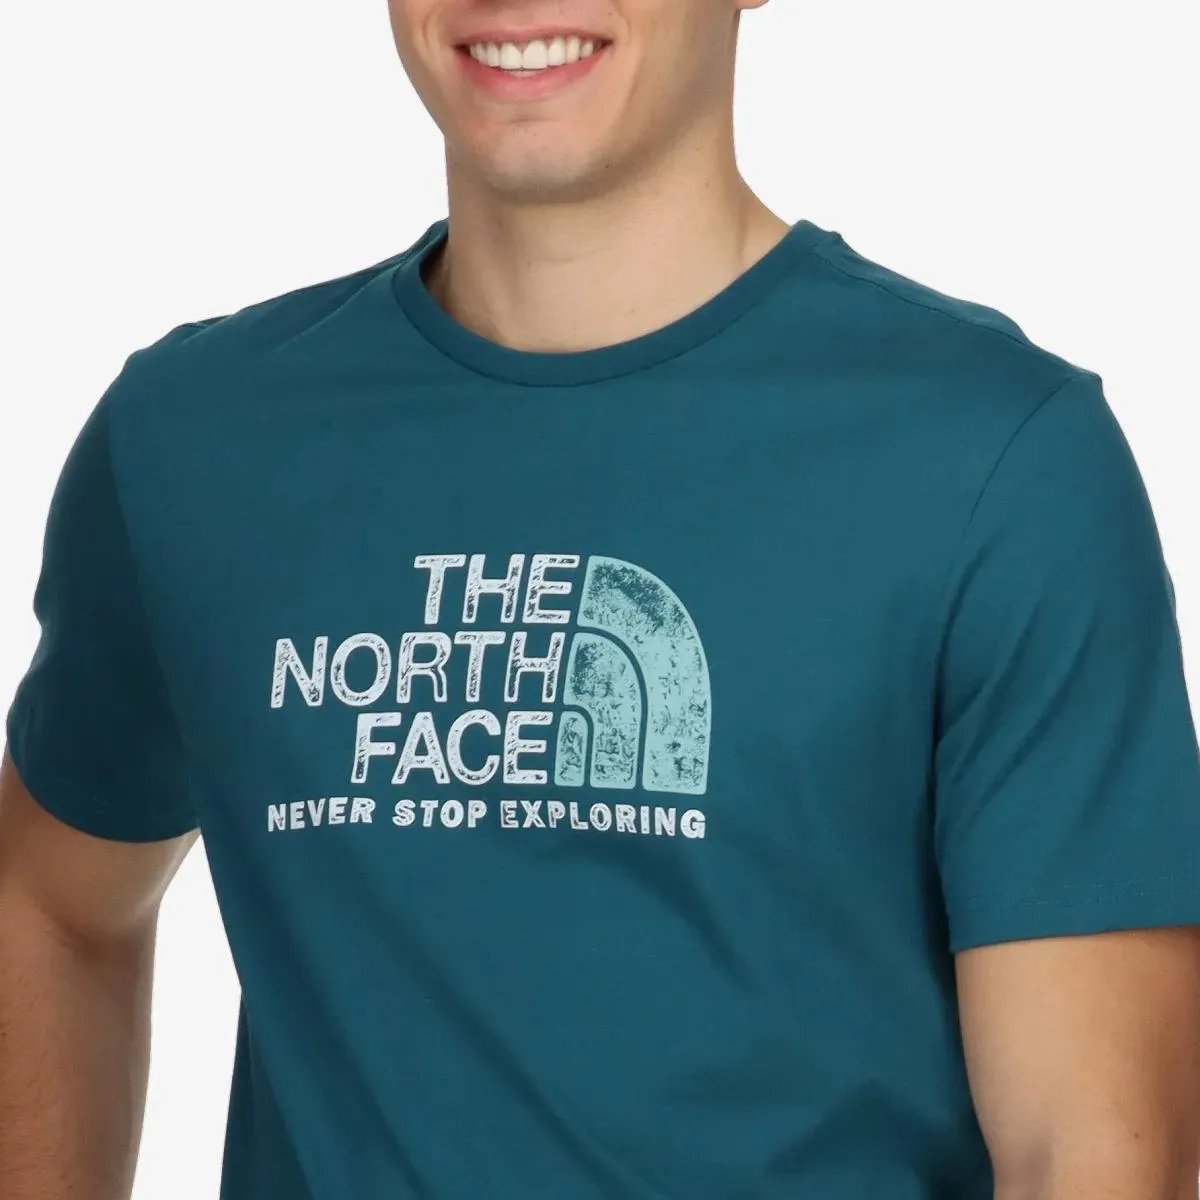 The North Face T-shirt Rust 2 